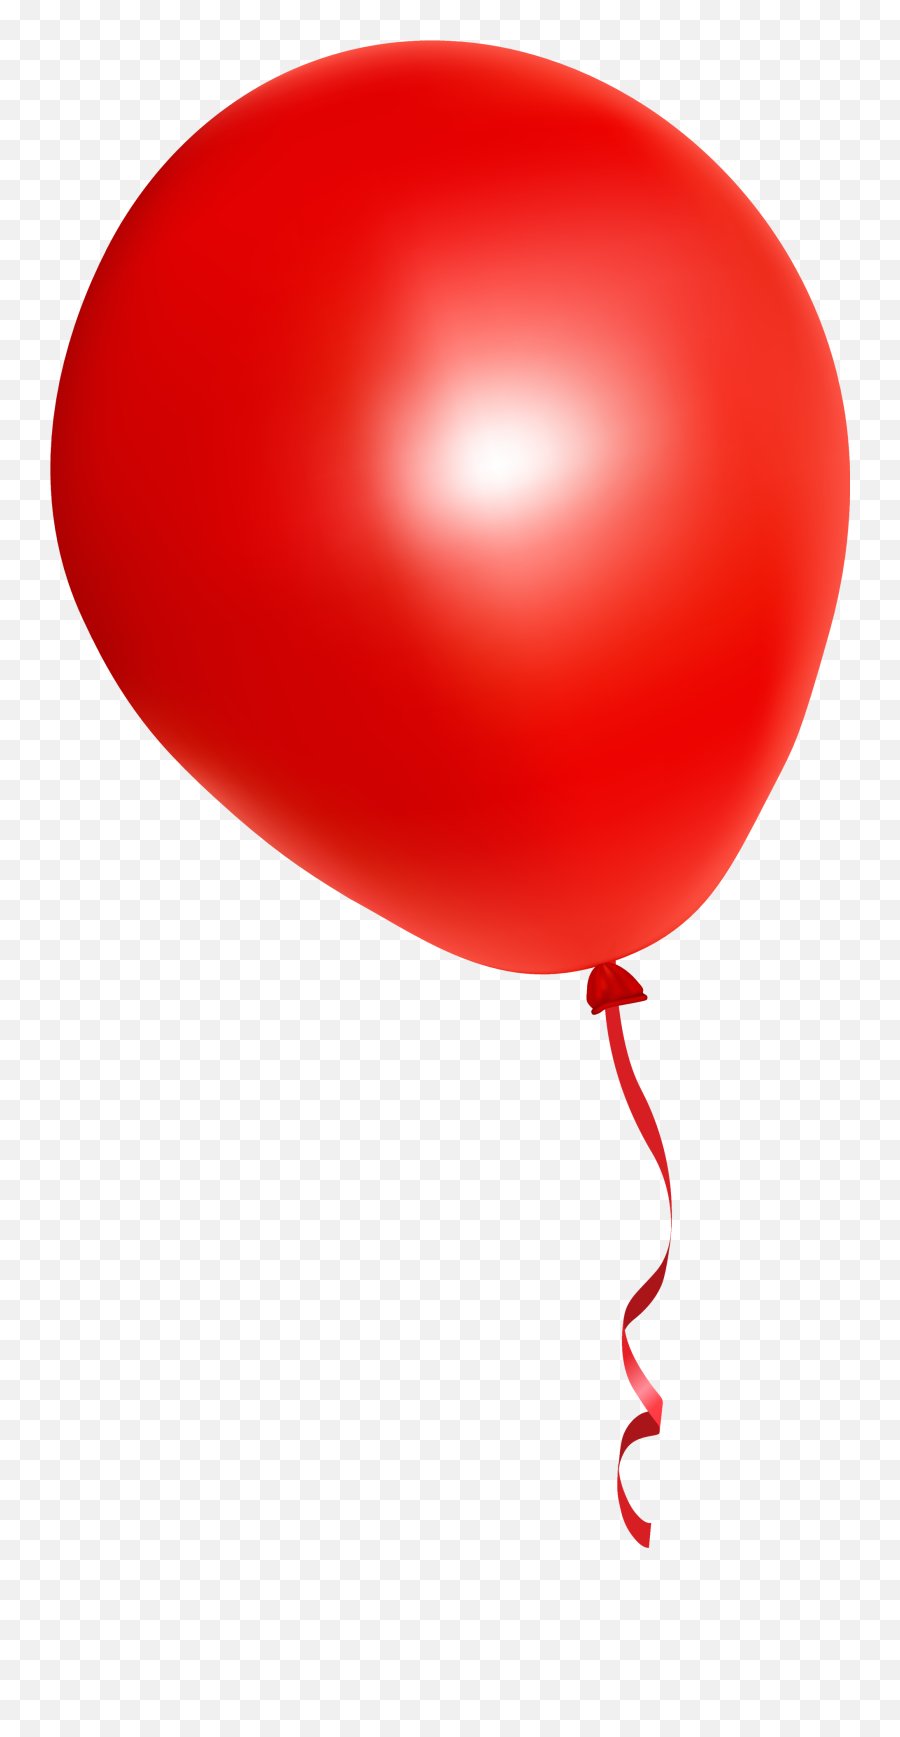 Red Balloons Transparent Png Clipart - Red Balloon Pennywise Transparent Background,Red Balloons Png